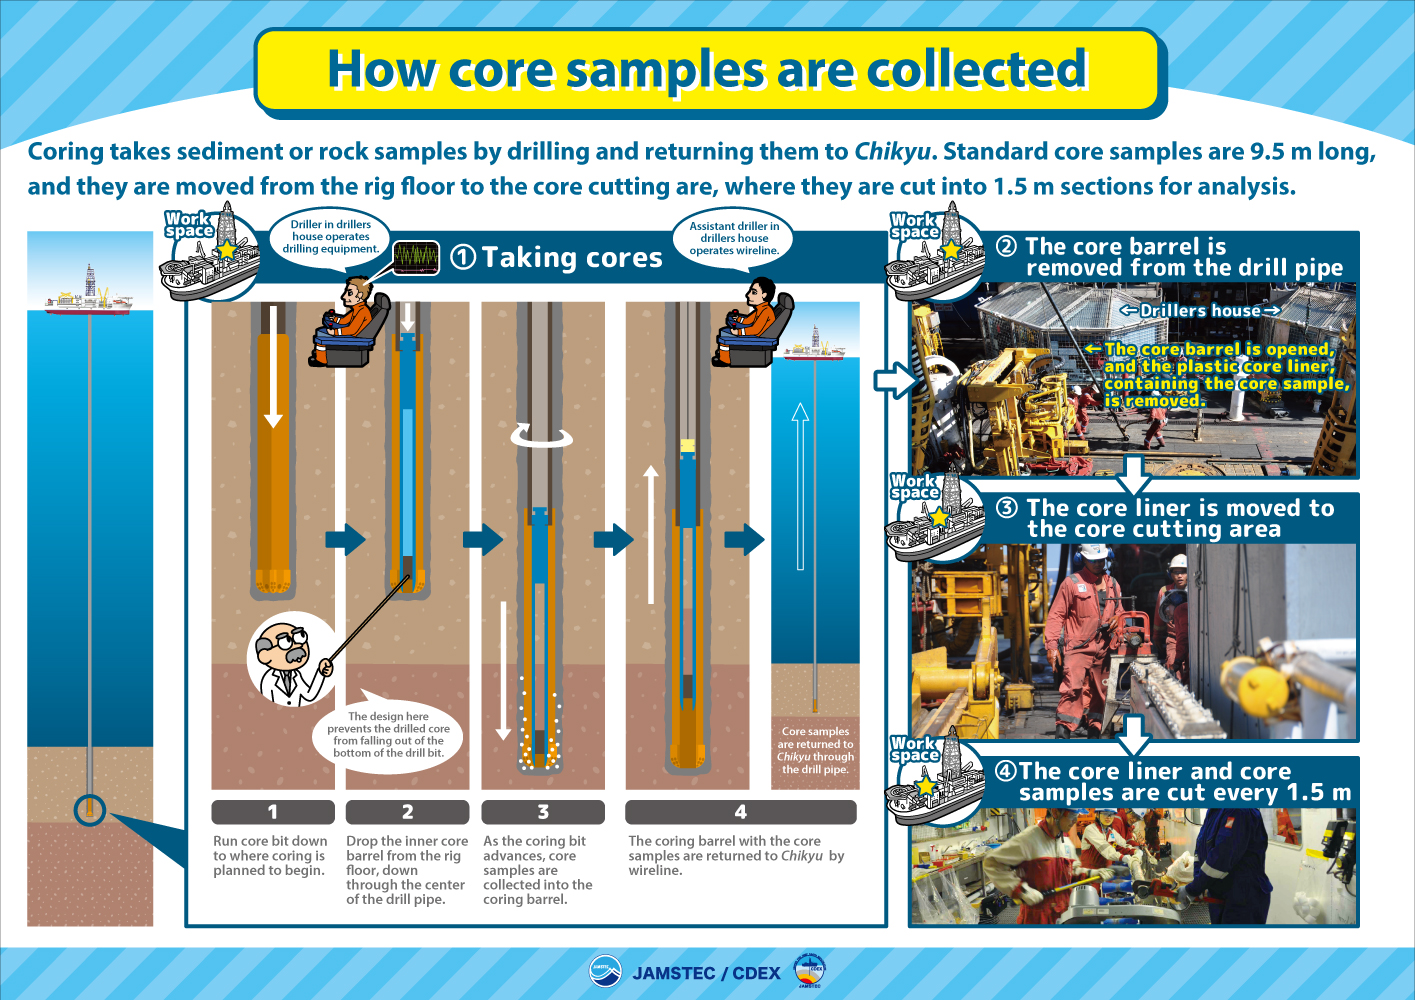 How core samples are collected